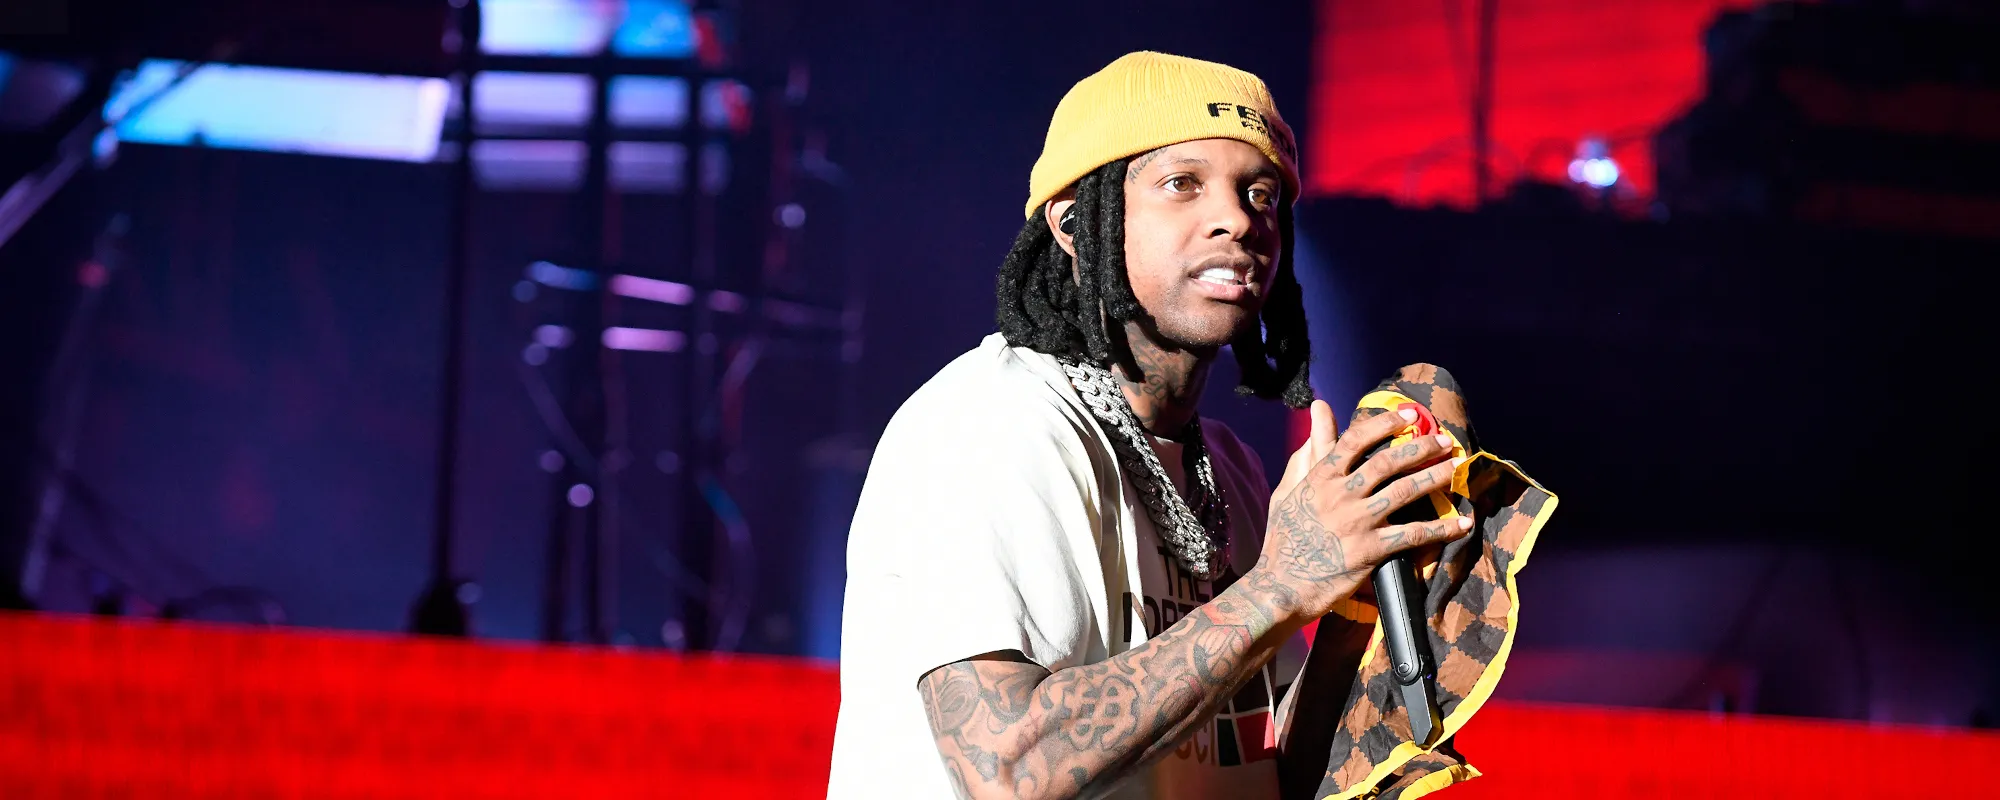 Lil Durk Previews Music Video with J. Cole Ahead of New Album